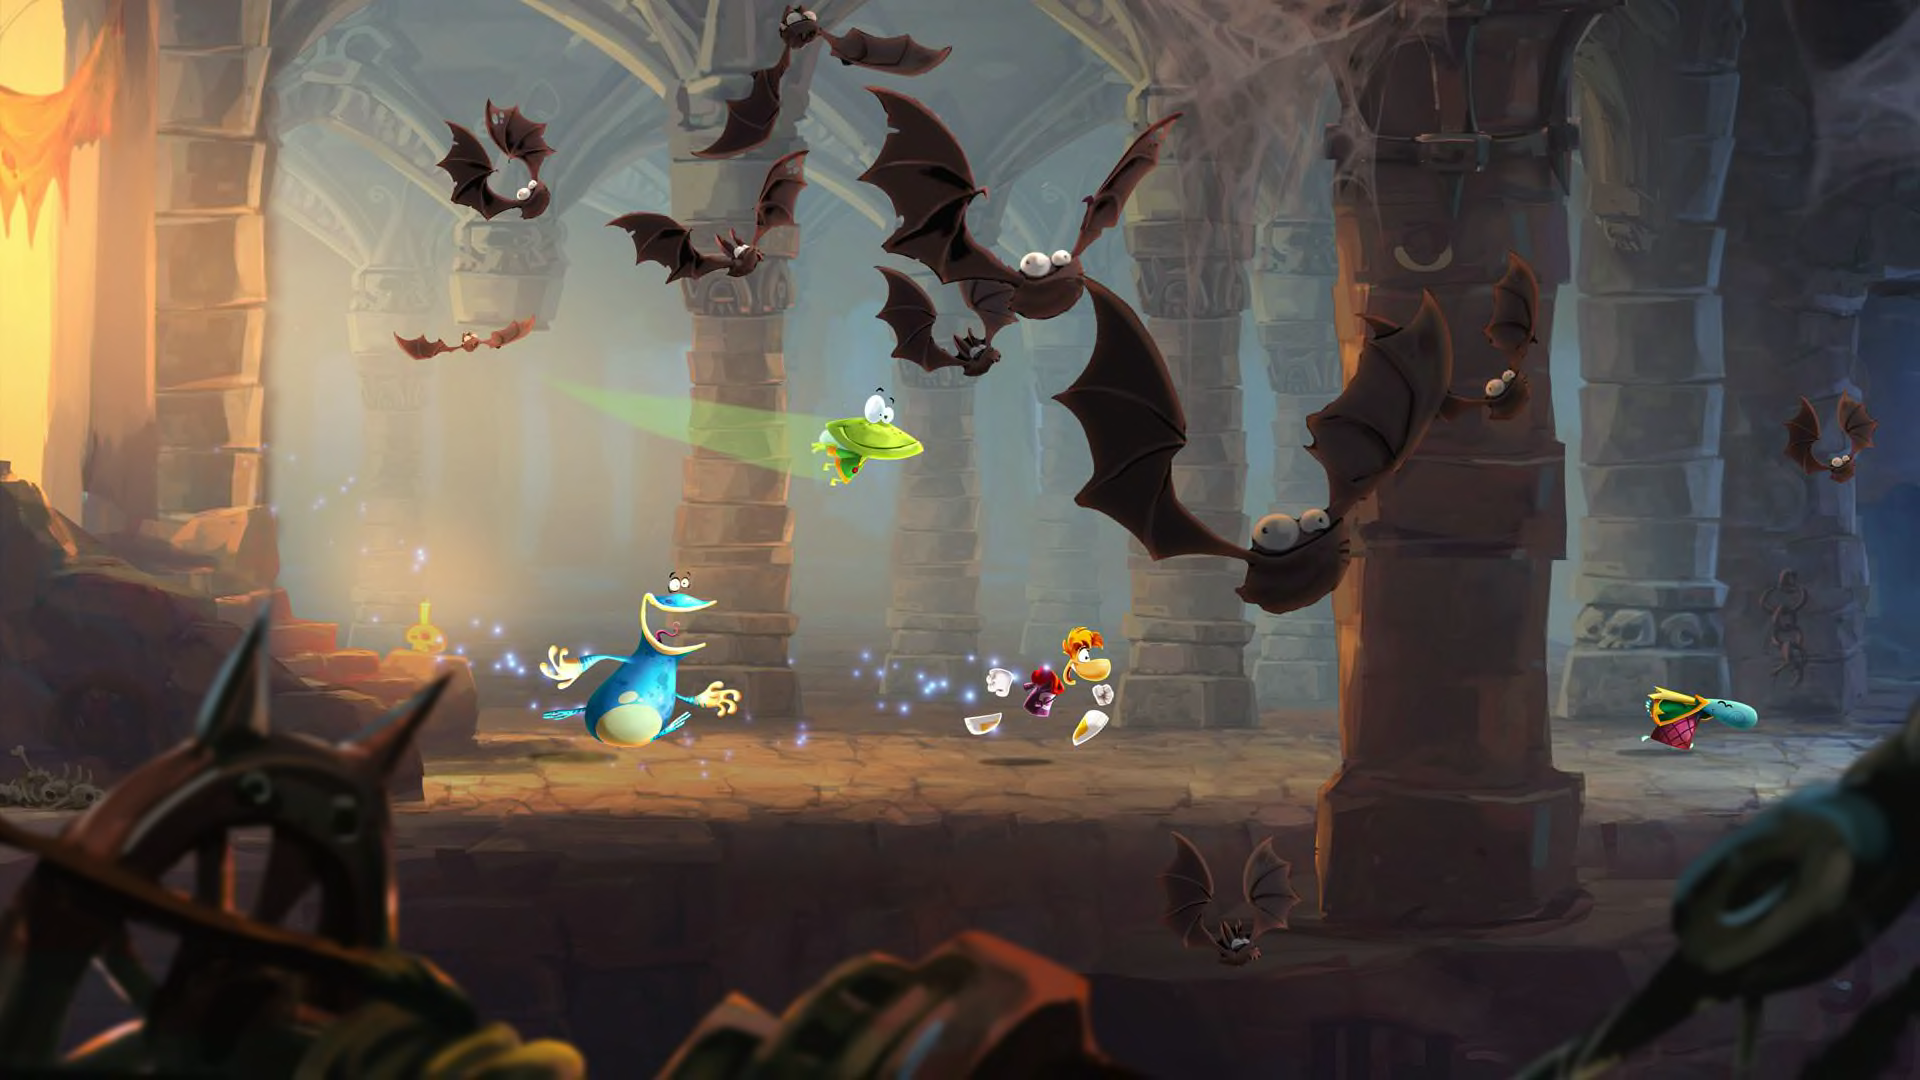 Rayman Legends' coming to 3DS?